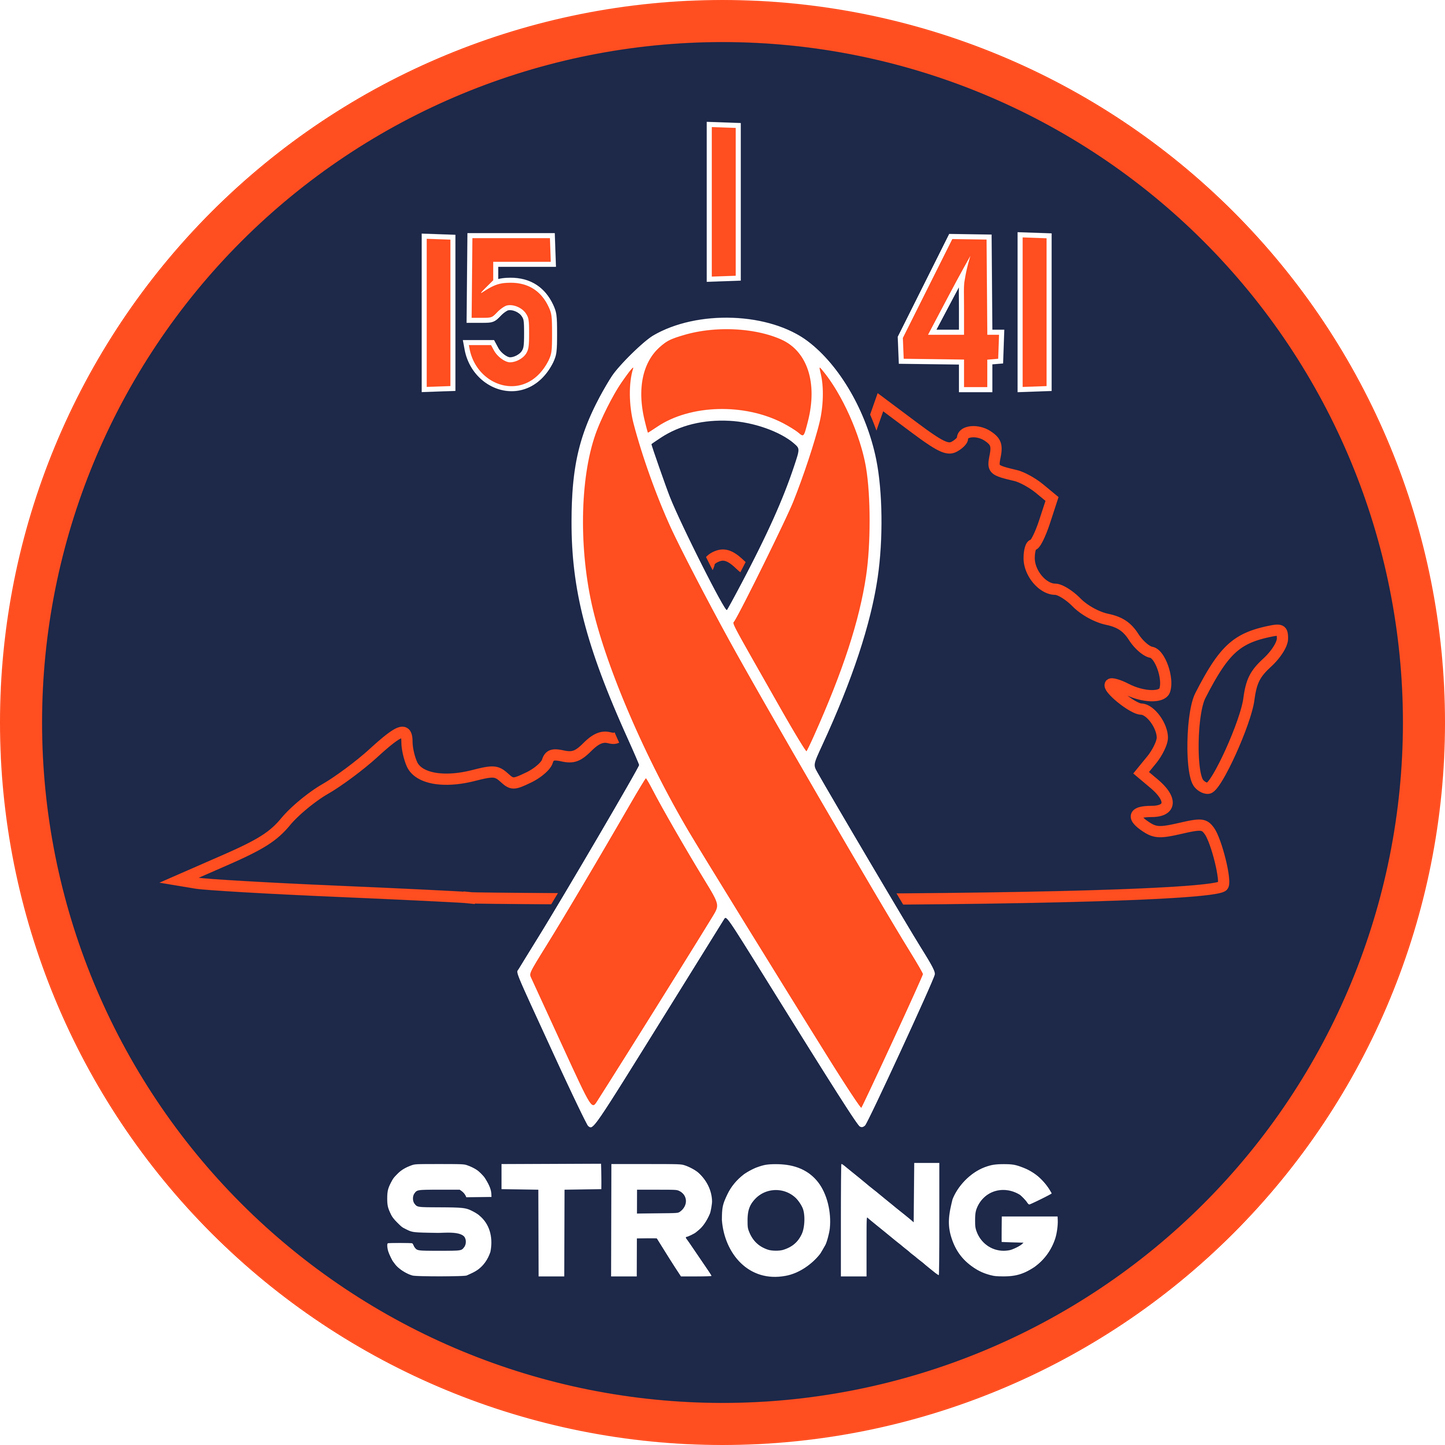 UVA STRONG Sticker - Single or 3 Pack